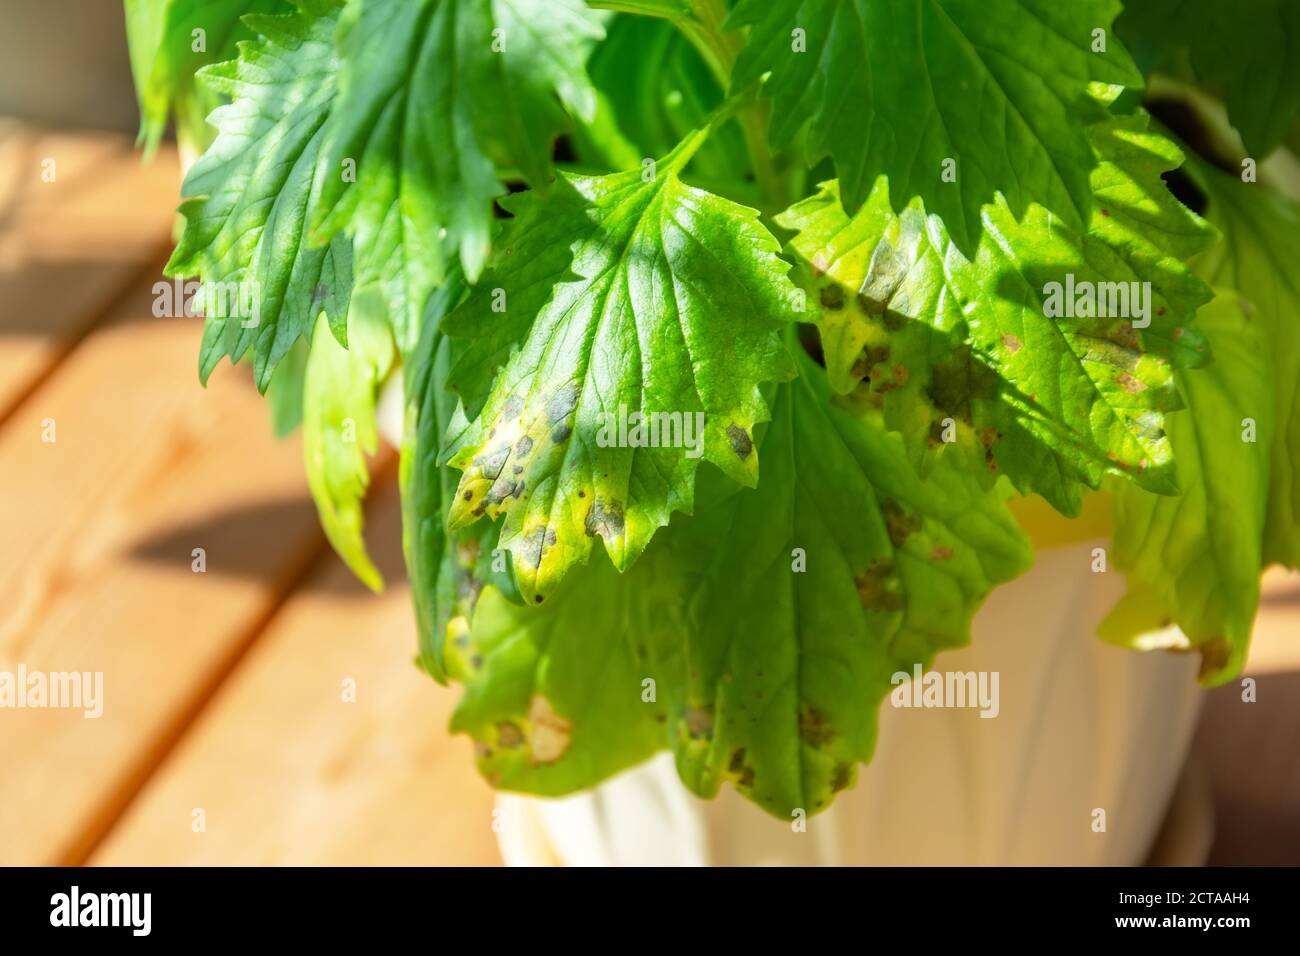 Leaves of an ornamental flowering plant in a pot with an infectious disease, dried leaves in spots Stock Photo